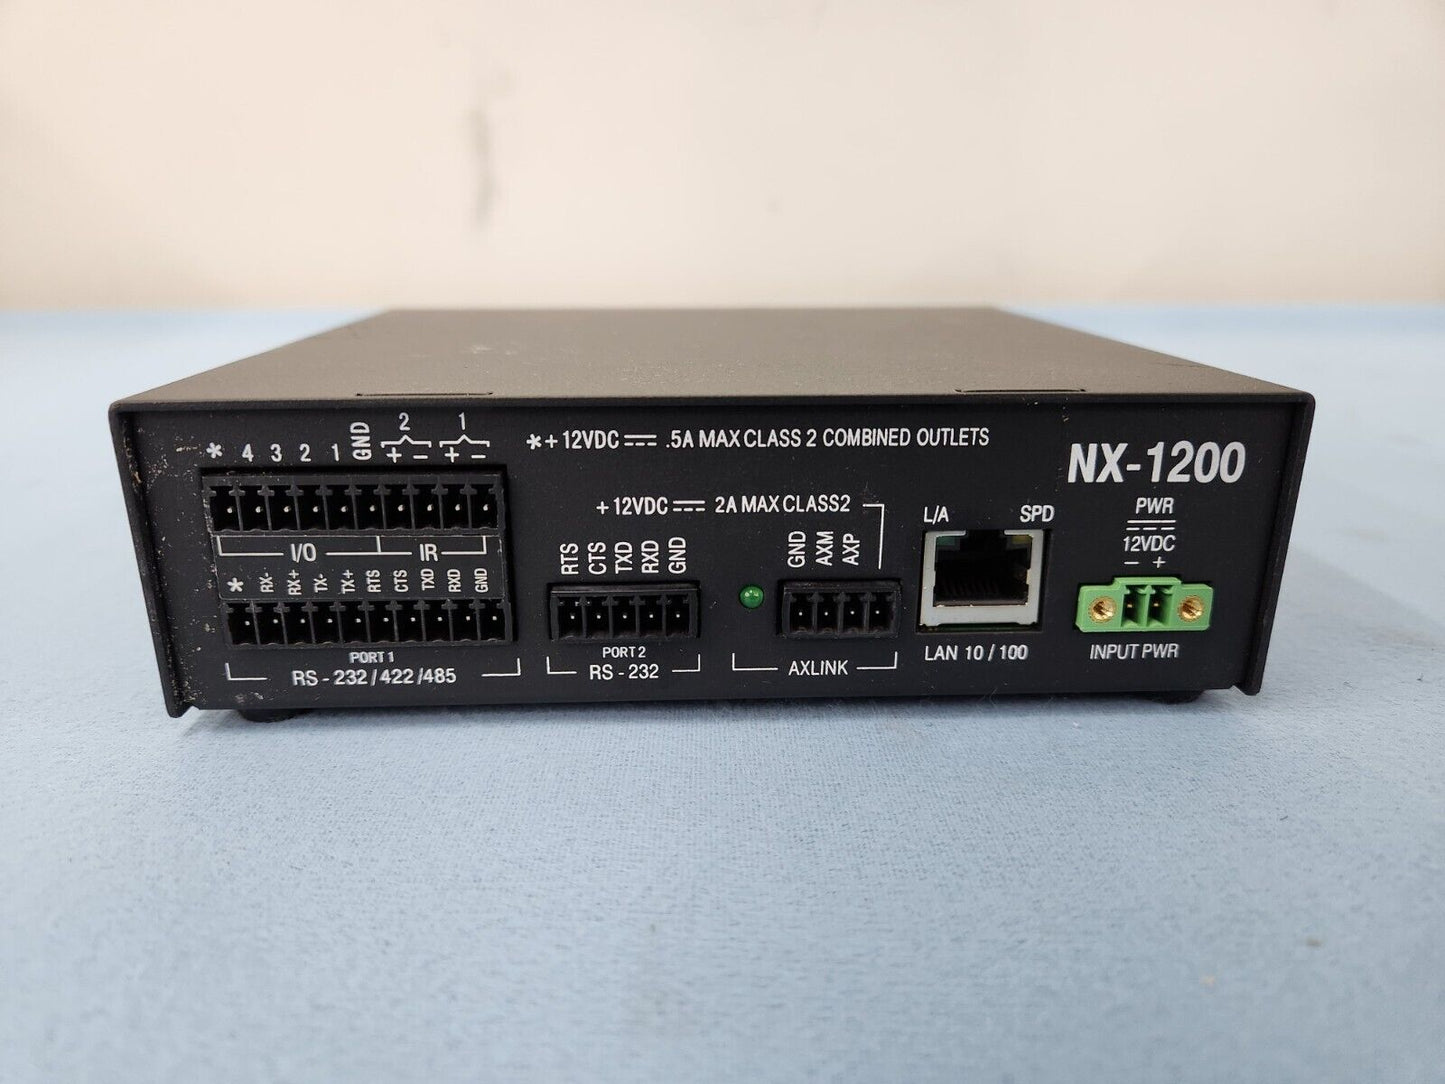 AMX NX-1200 NetLinx NX Integrated Controller FG2106-01 Great Condition